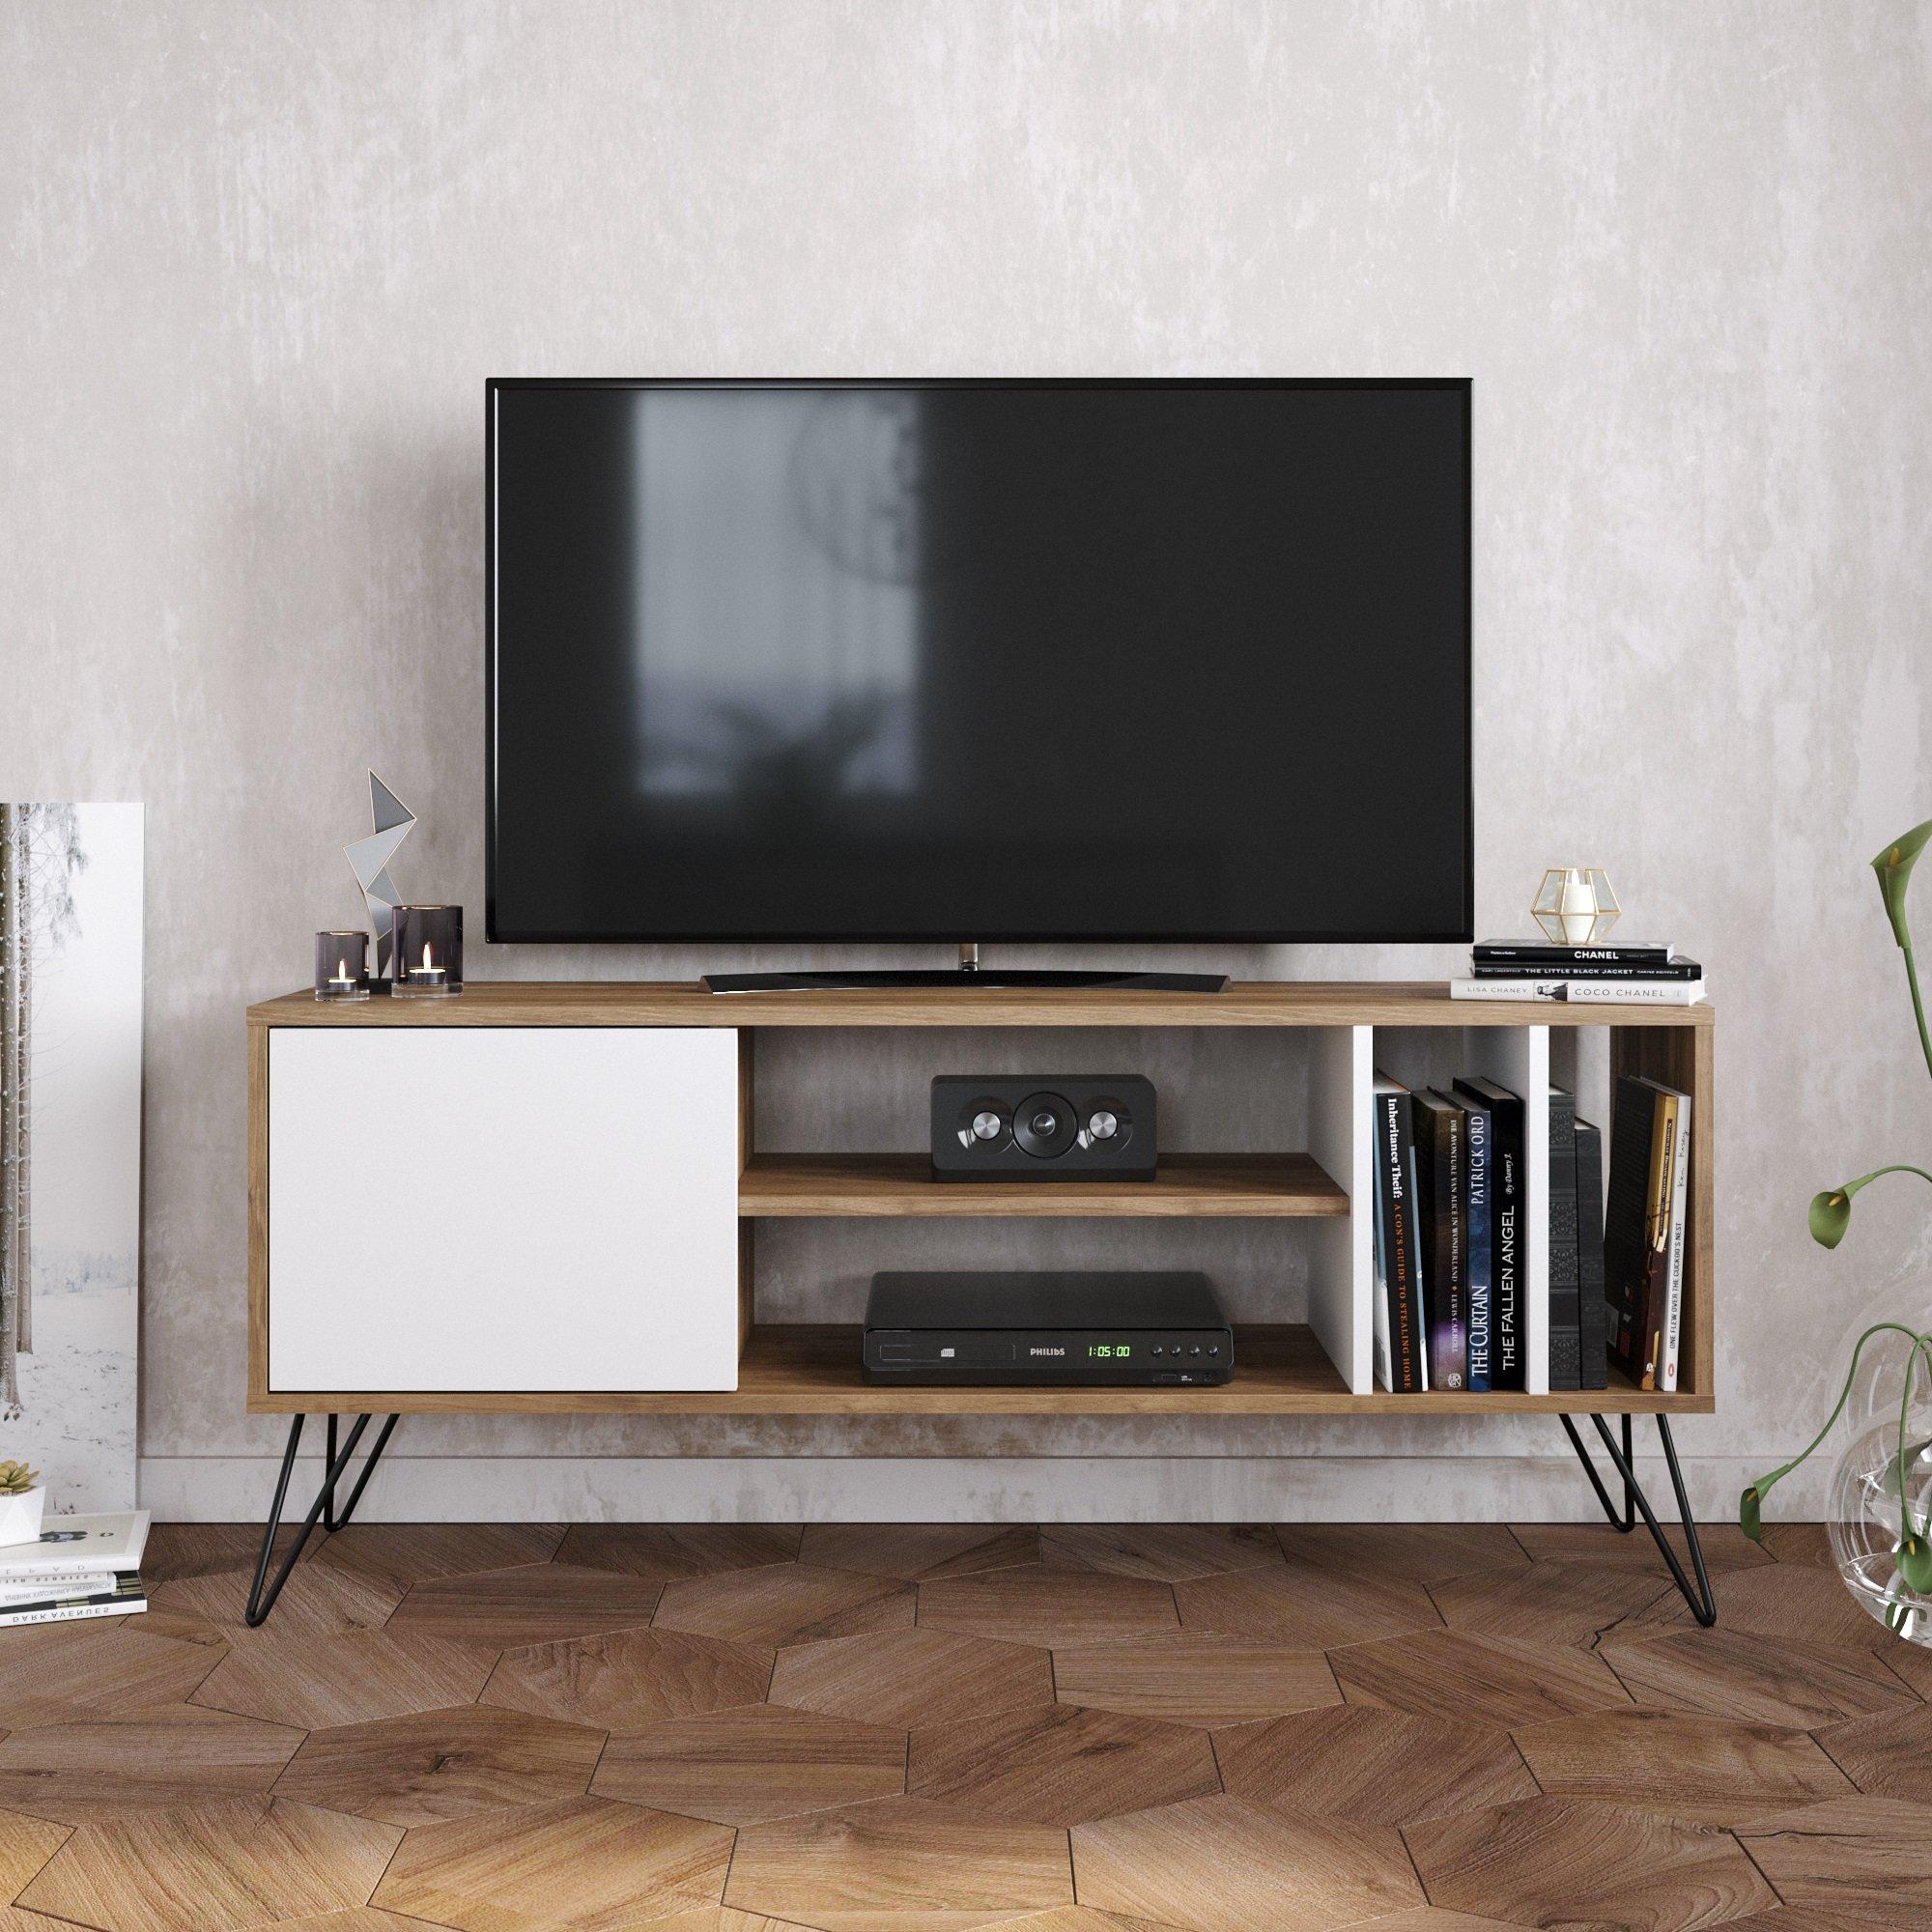 Mistico TV Stand TV Unit for TVs up to 55 inches